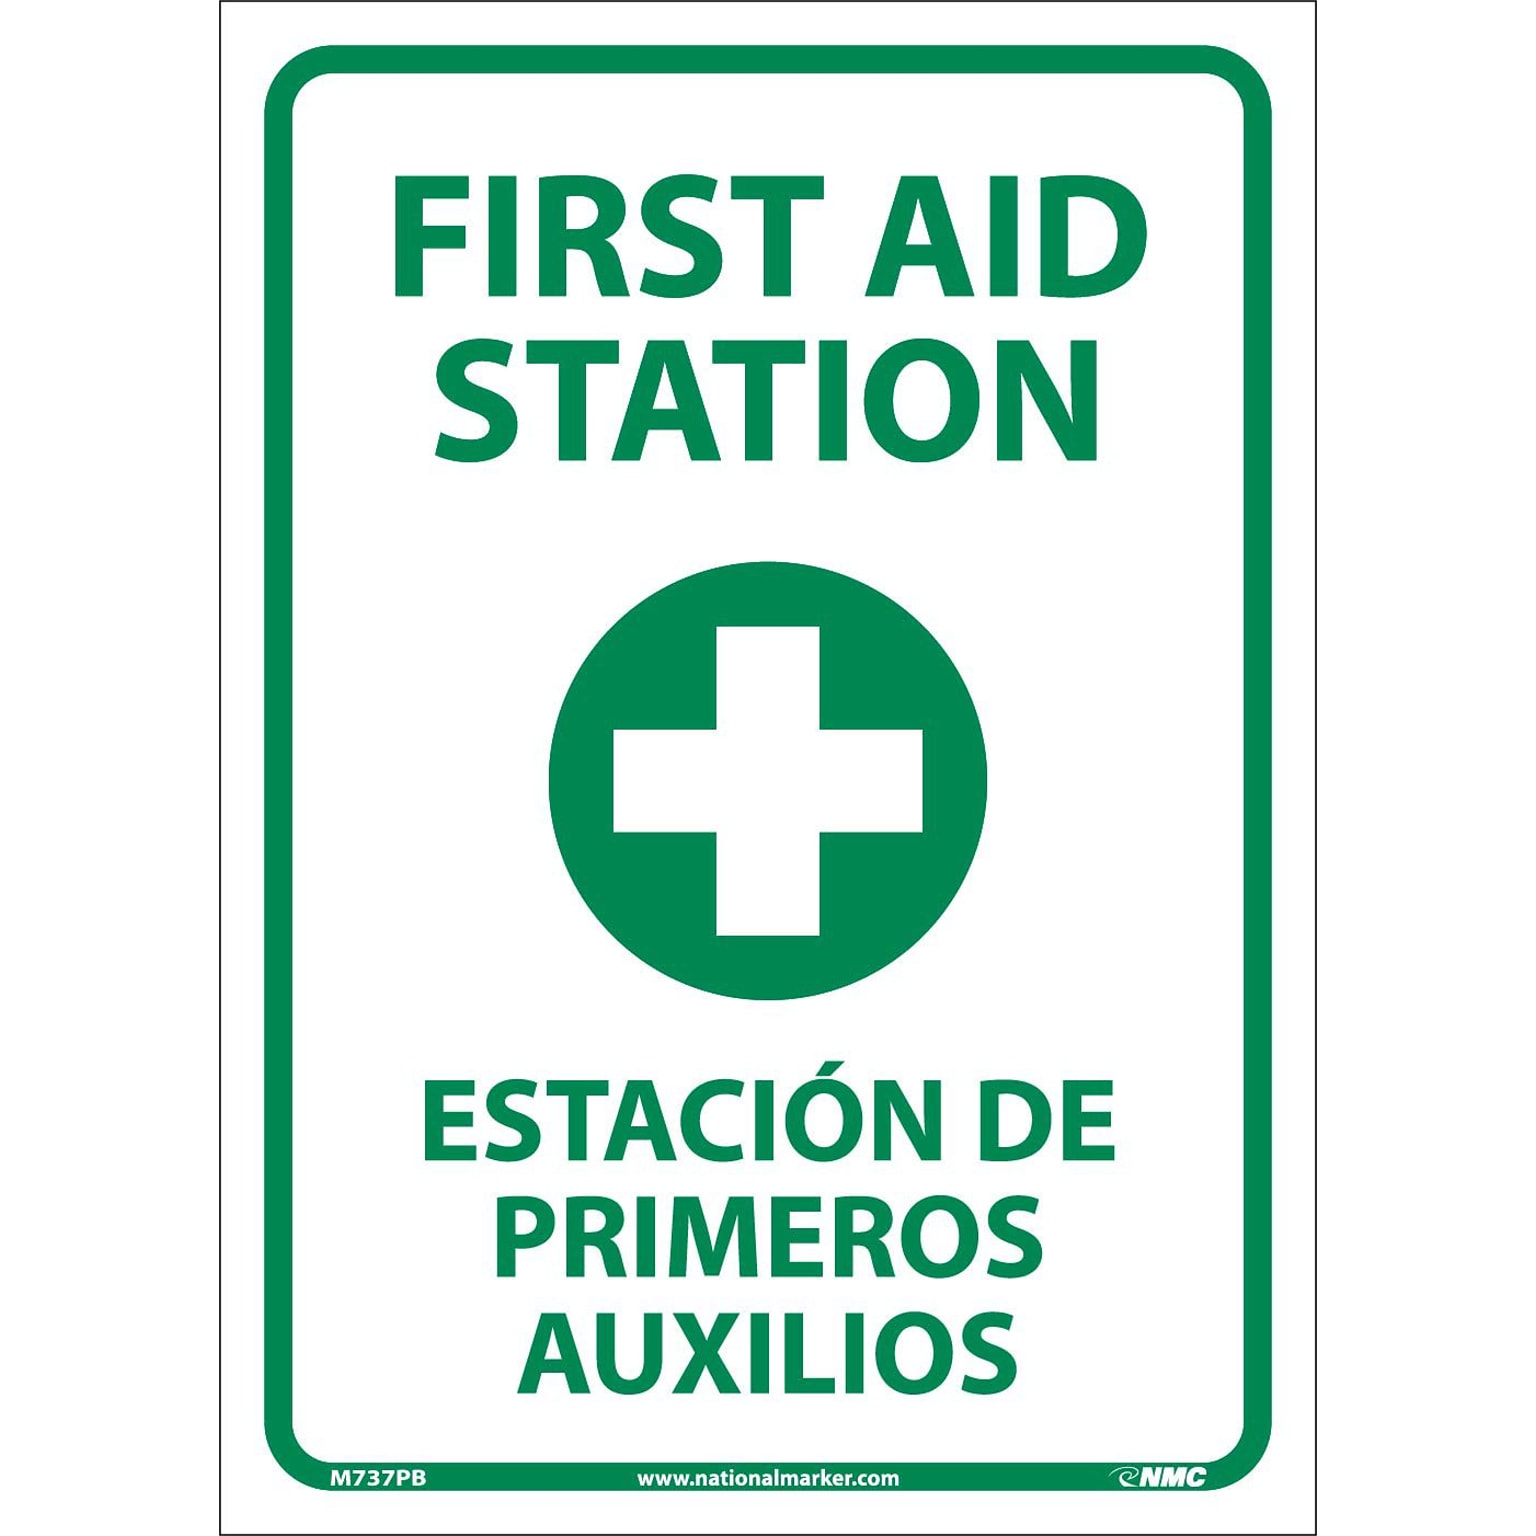 Information Labels; First Aid Station (Graphic), Bilingual, 14X10, Adhesive Vinyl